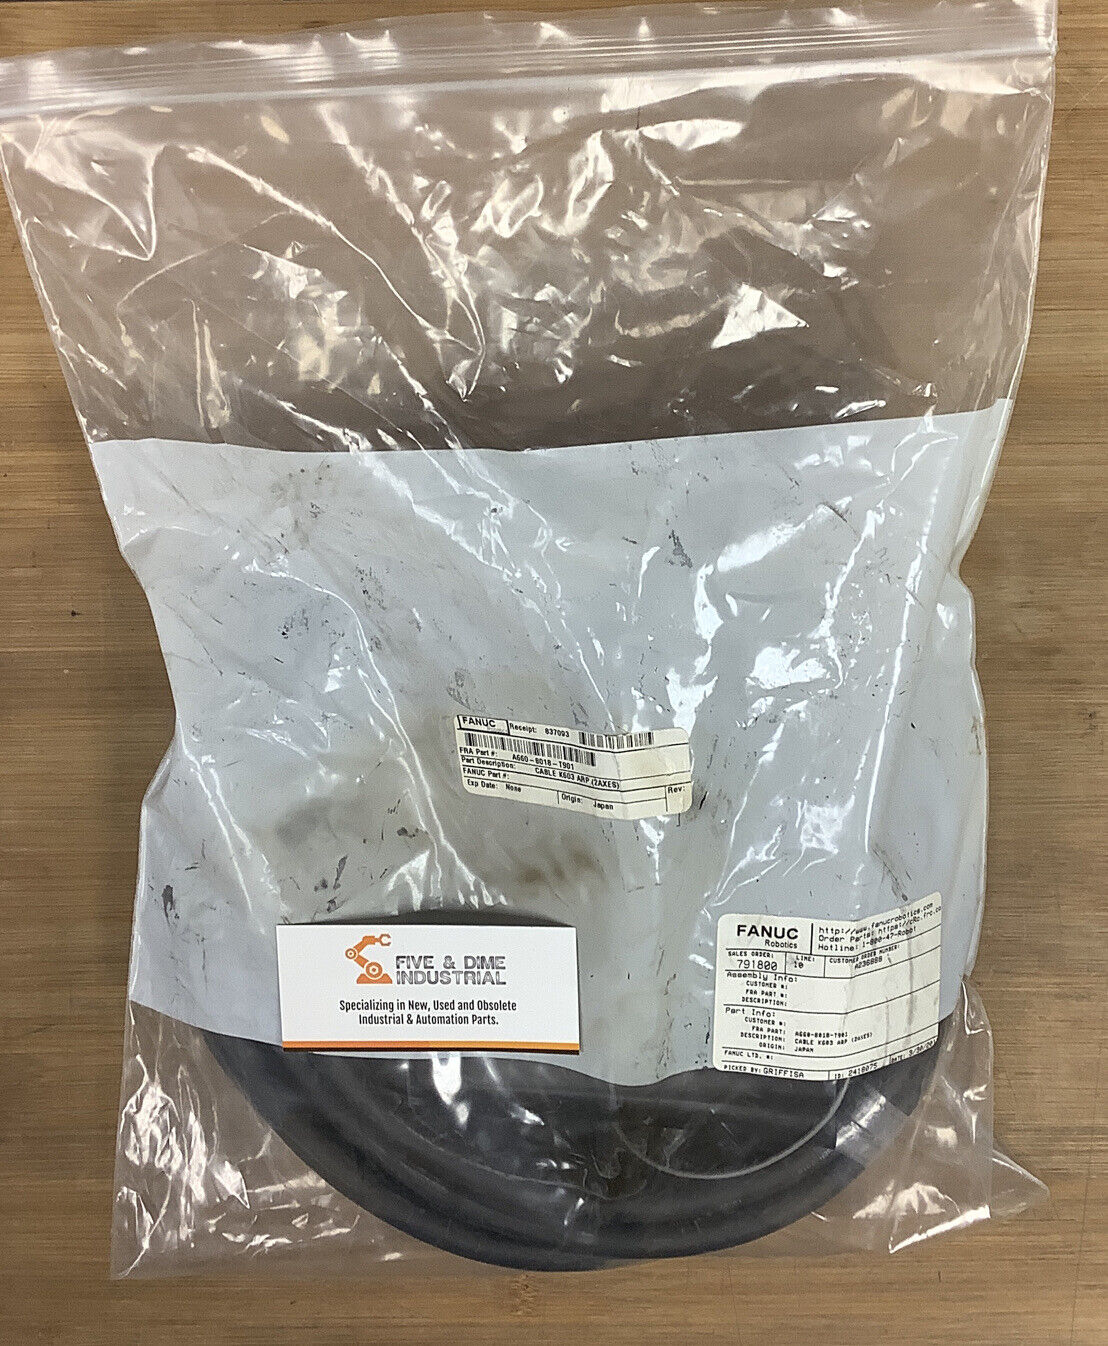 Fanuc A660-8018-T901 Cable K603 ARP 2-AXES 10 Meters (CBL116)